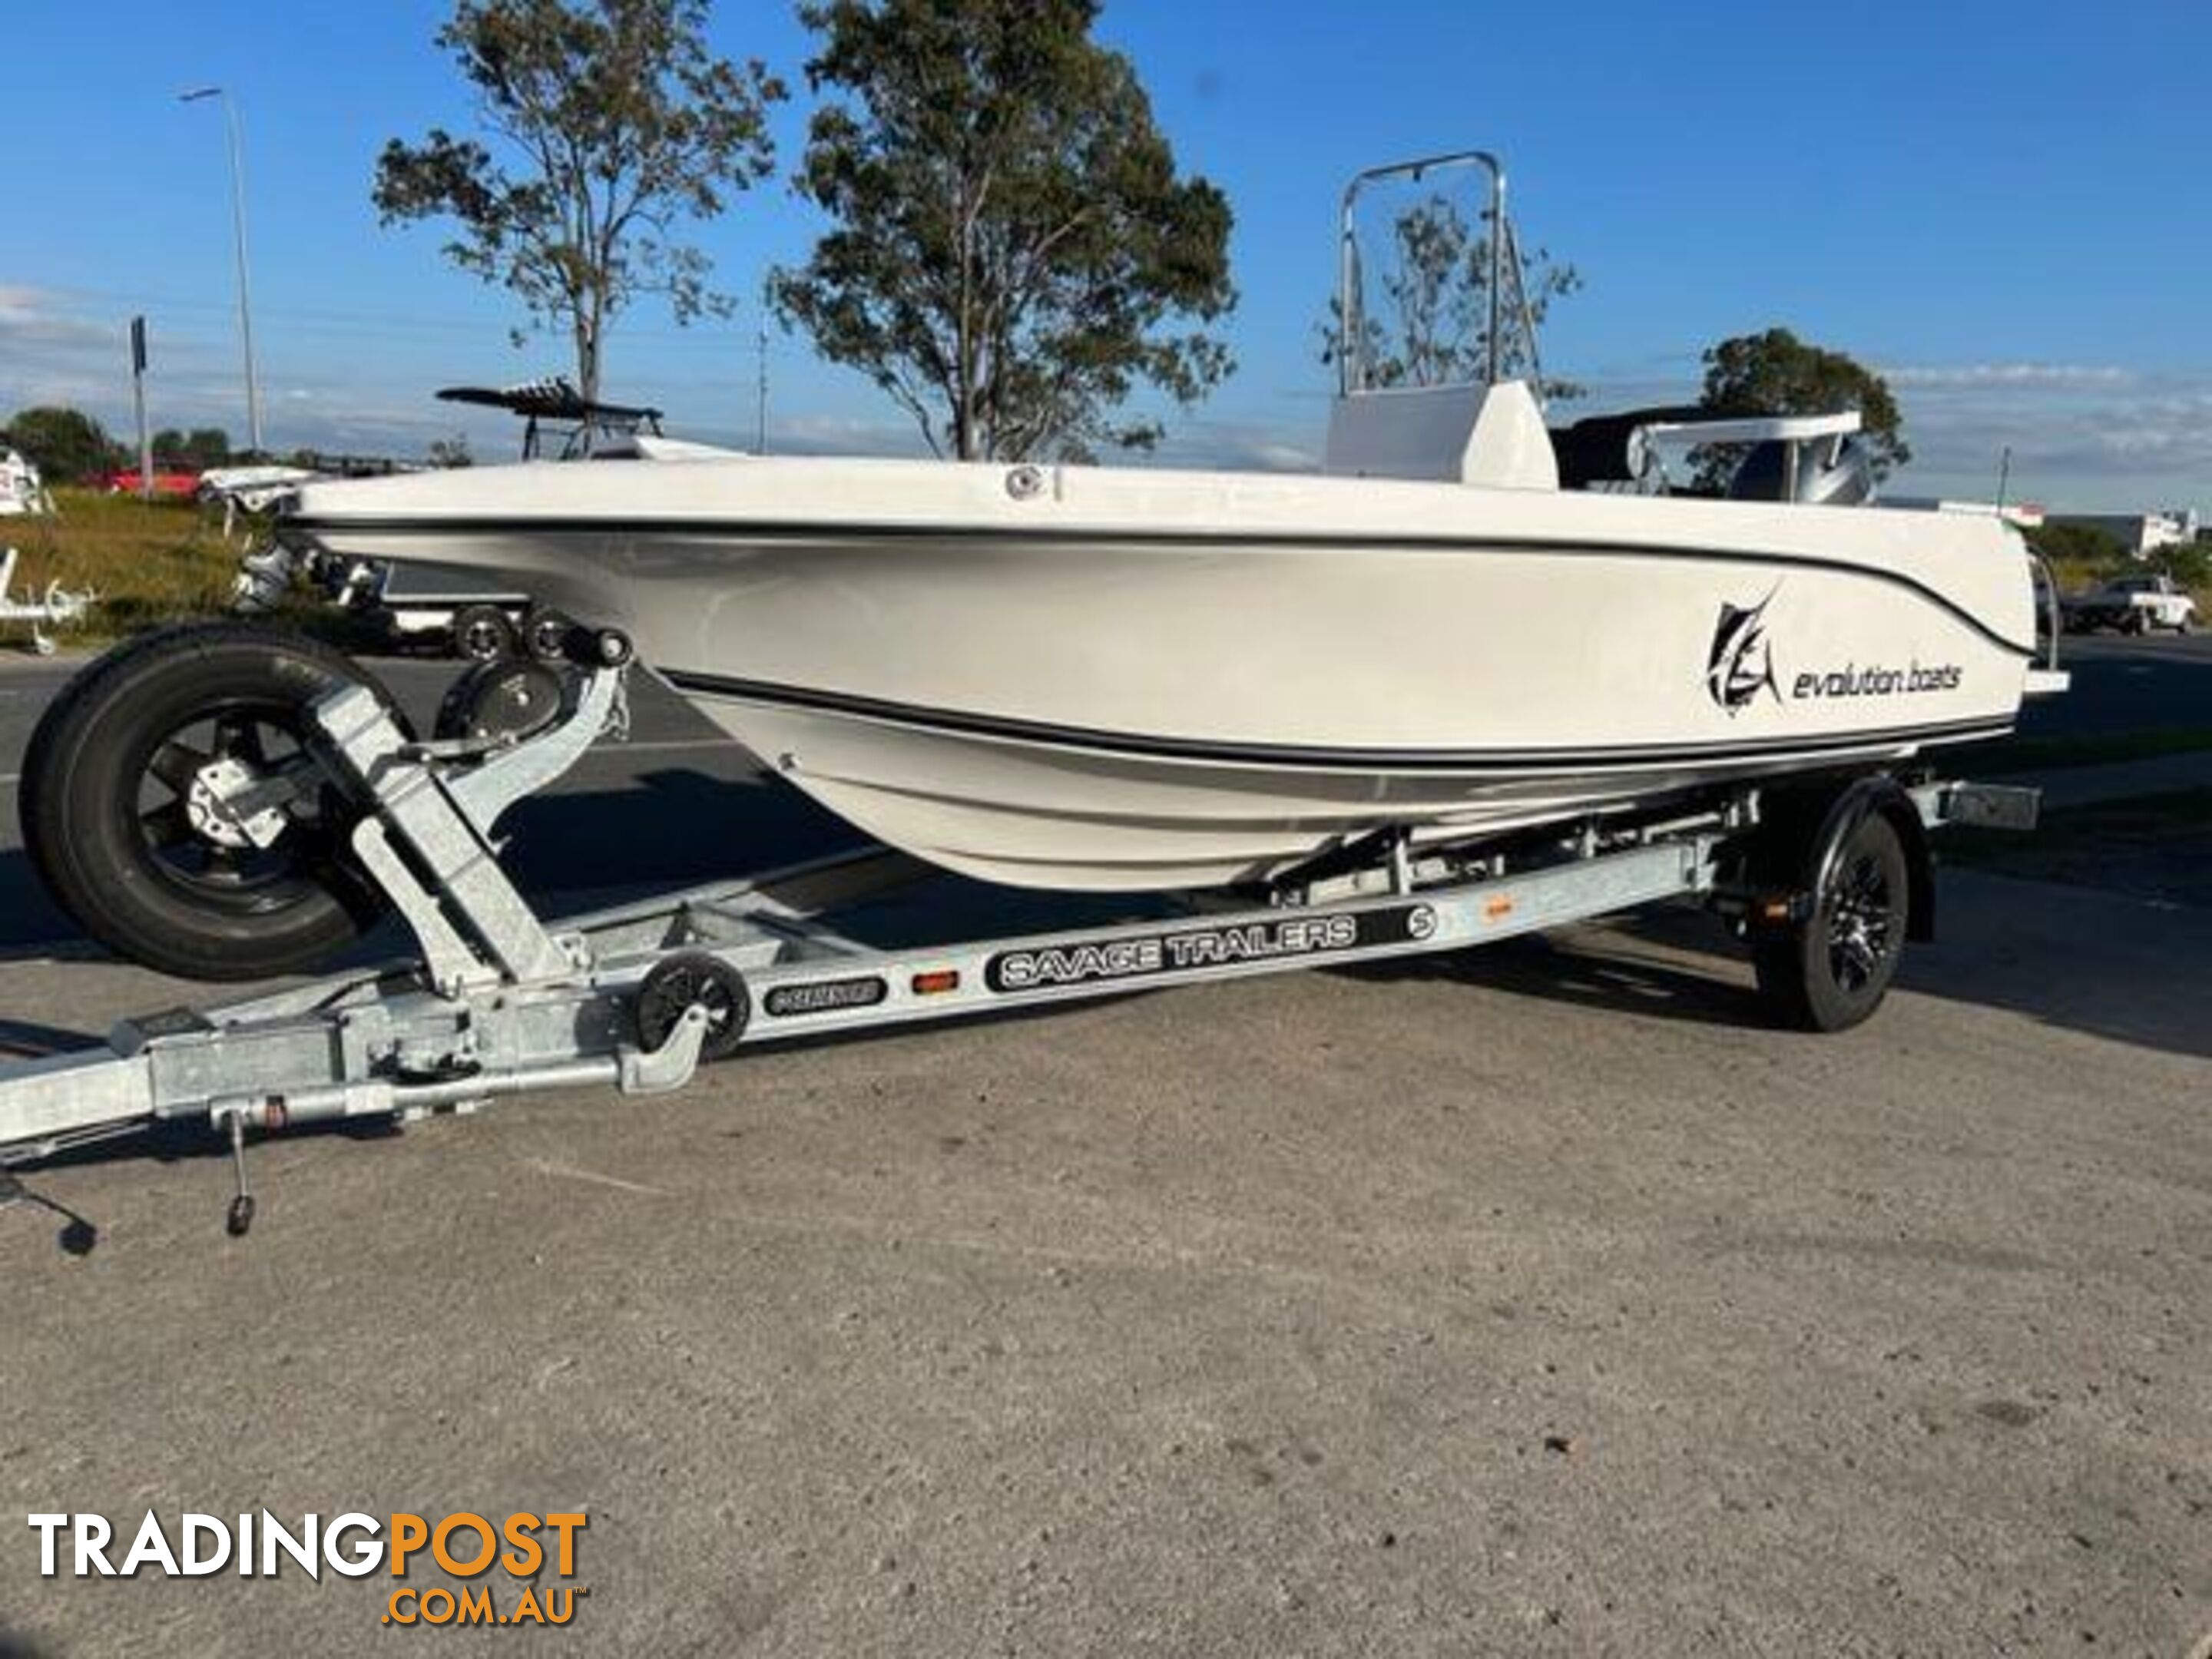 NEW 2024 EVOLUTION 500 AXIS CENTRE CONSOLE WITH YAMAHA 90HP  FOR SALE